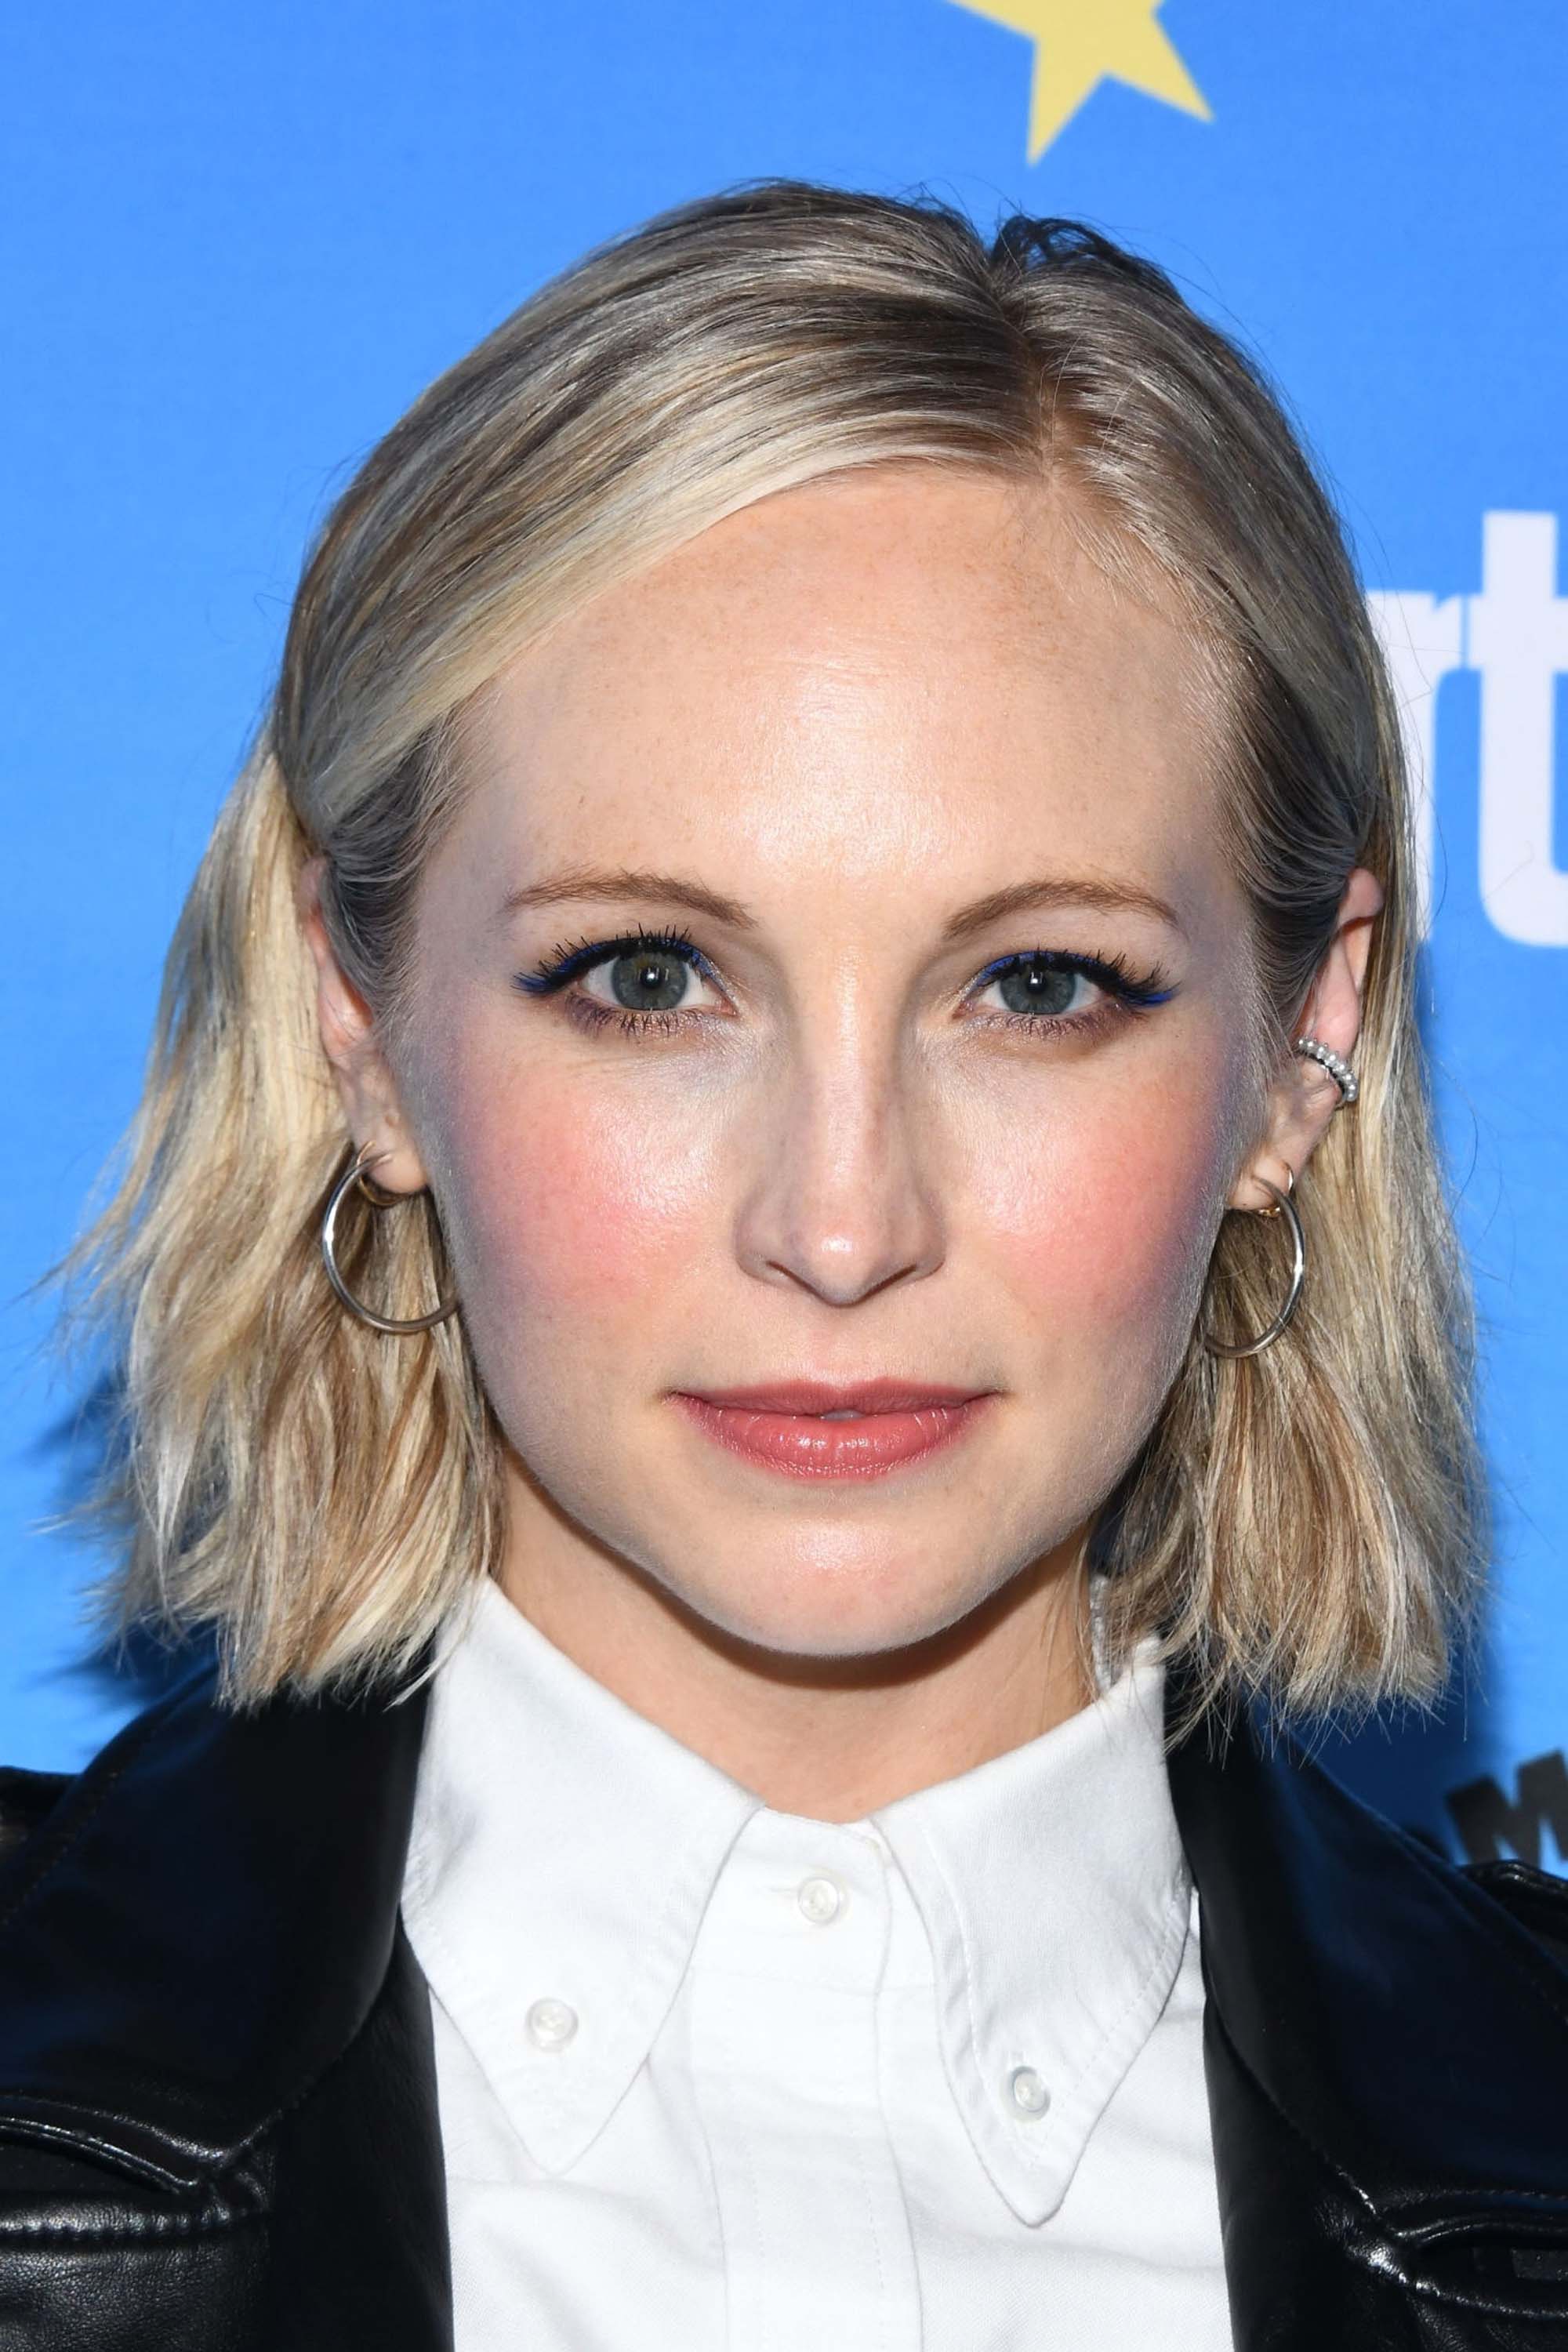 Candice King attends the Entertainment Weekly Comic-Con